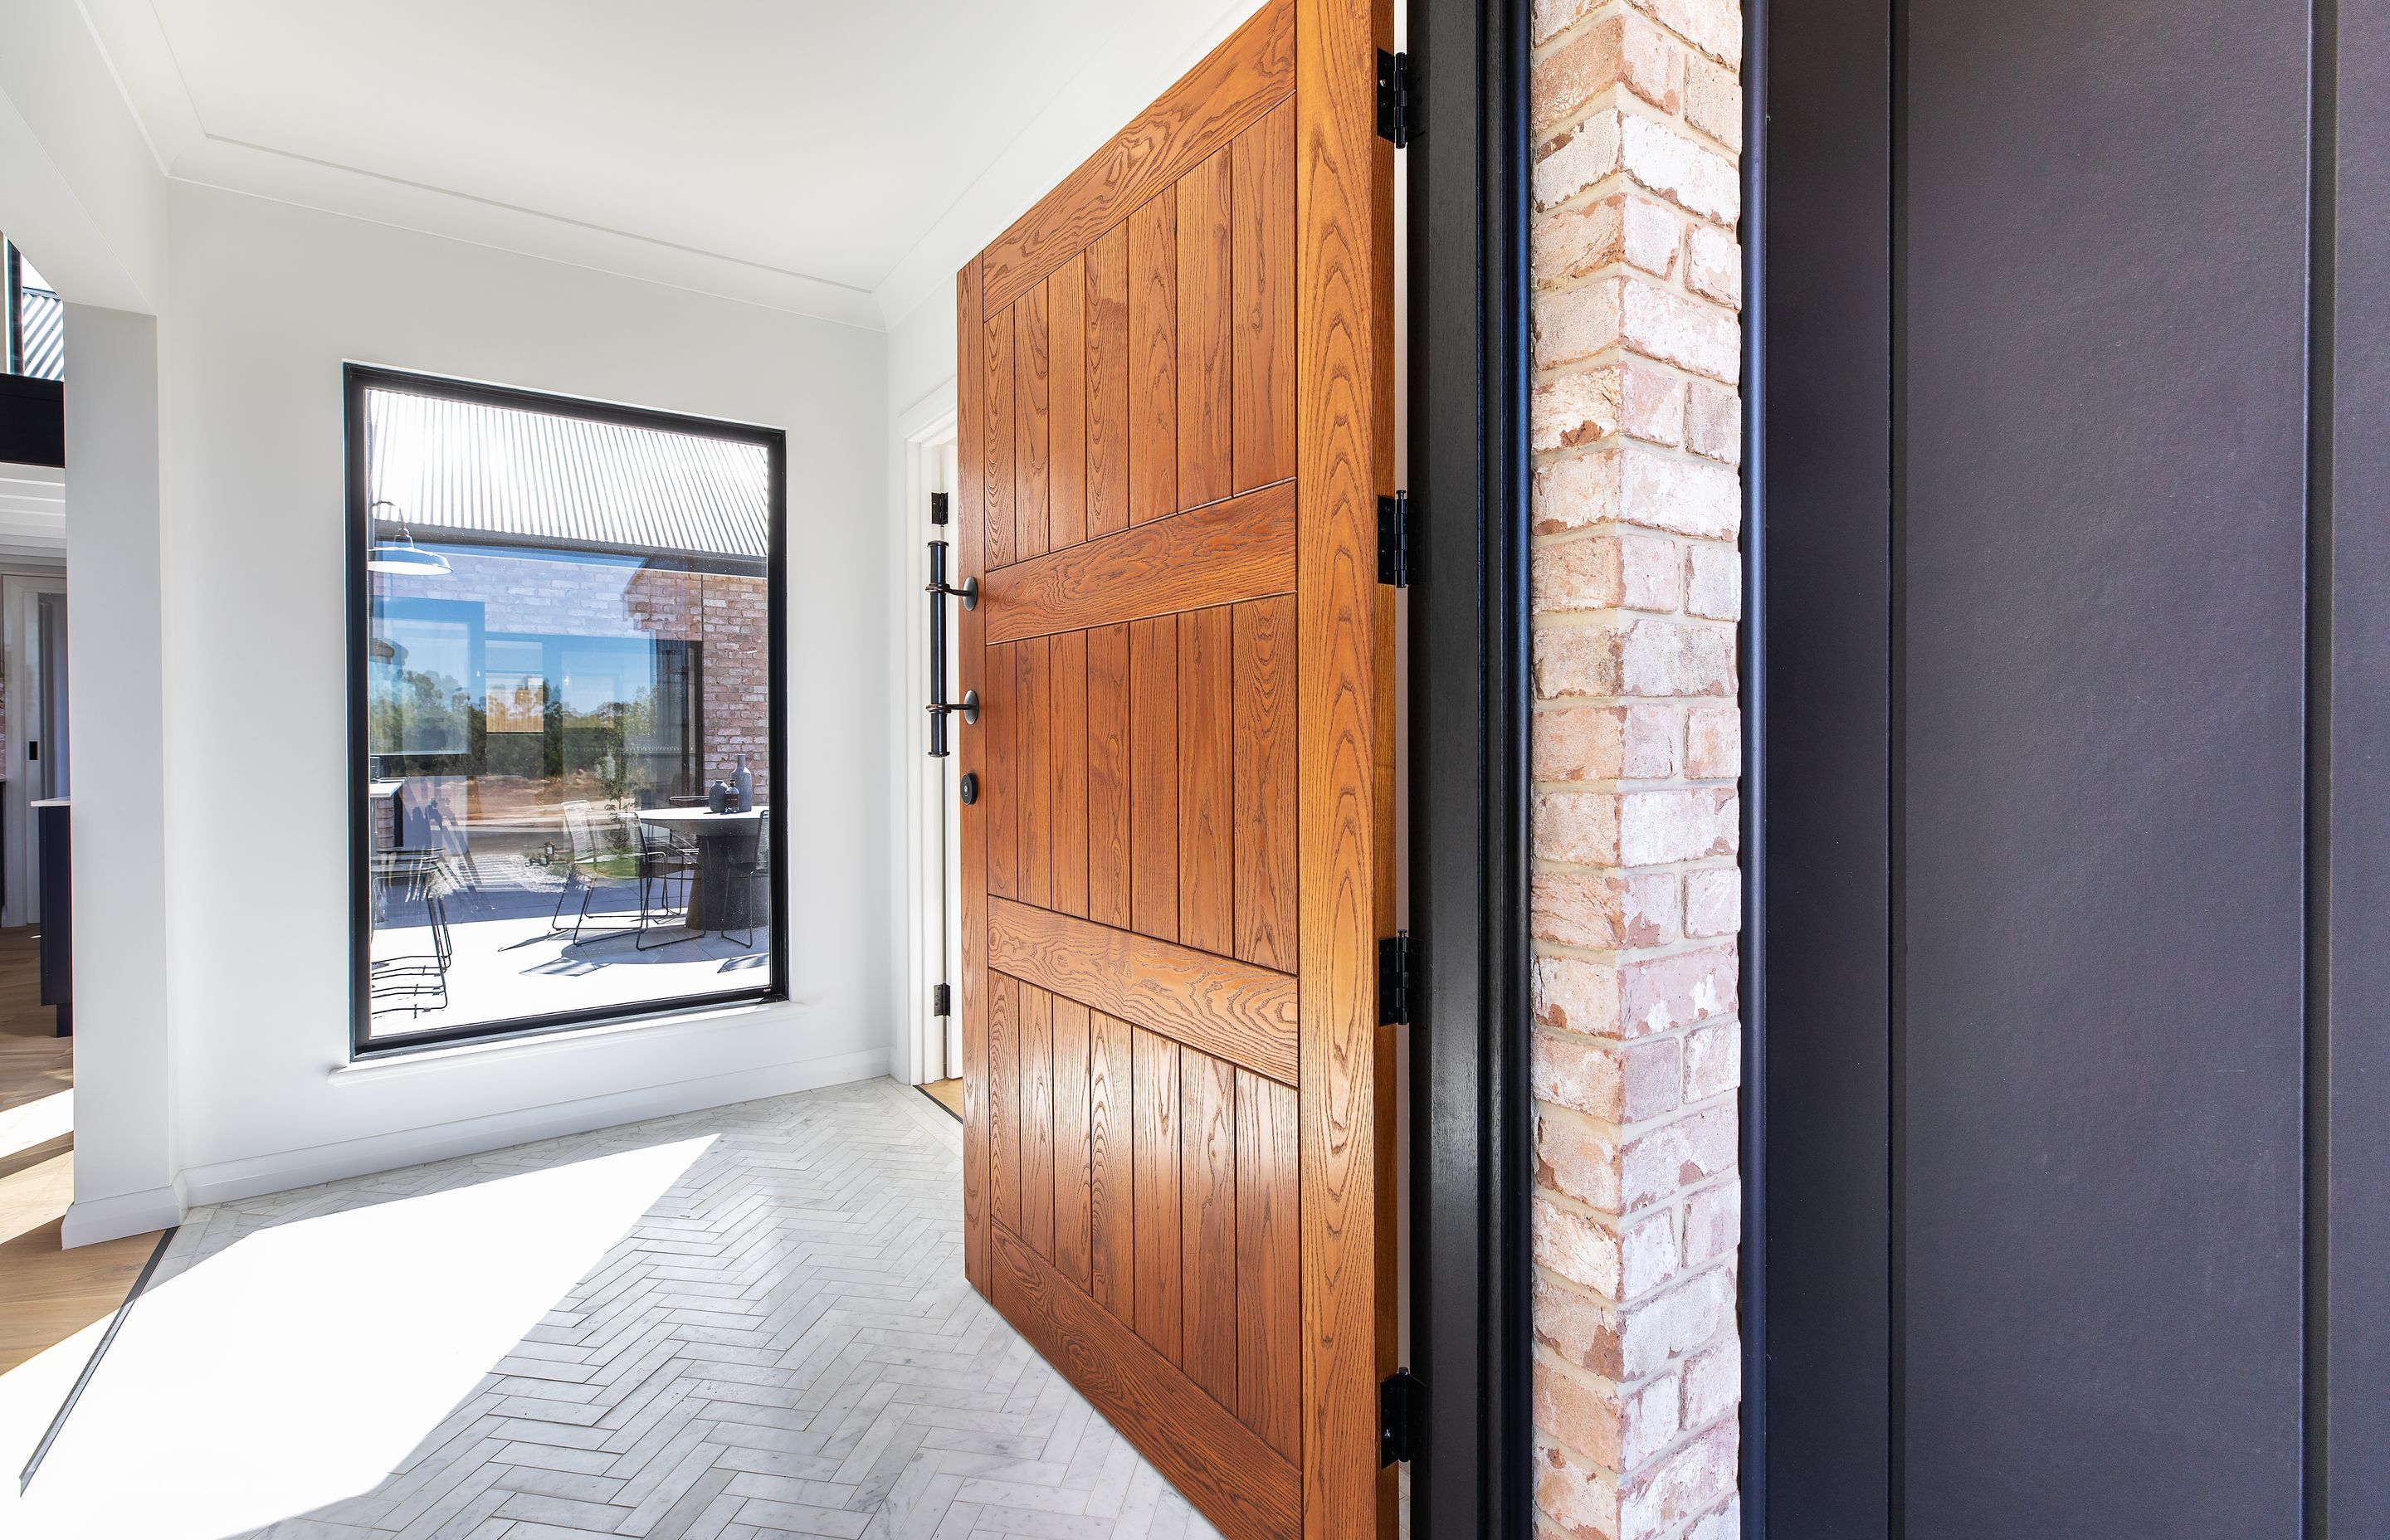 Timber doors are instantly recognisable.